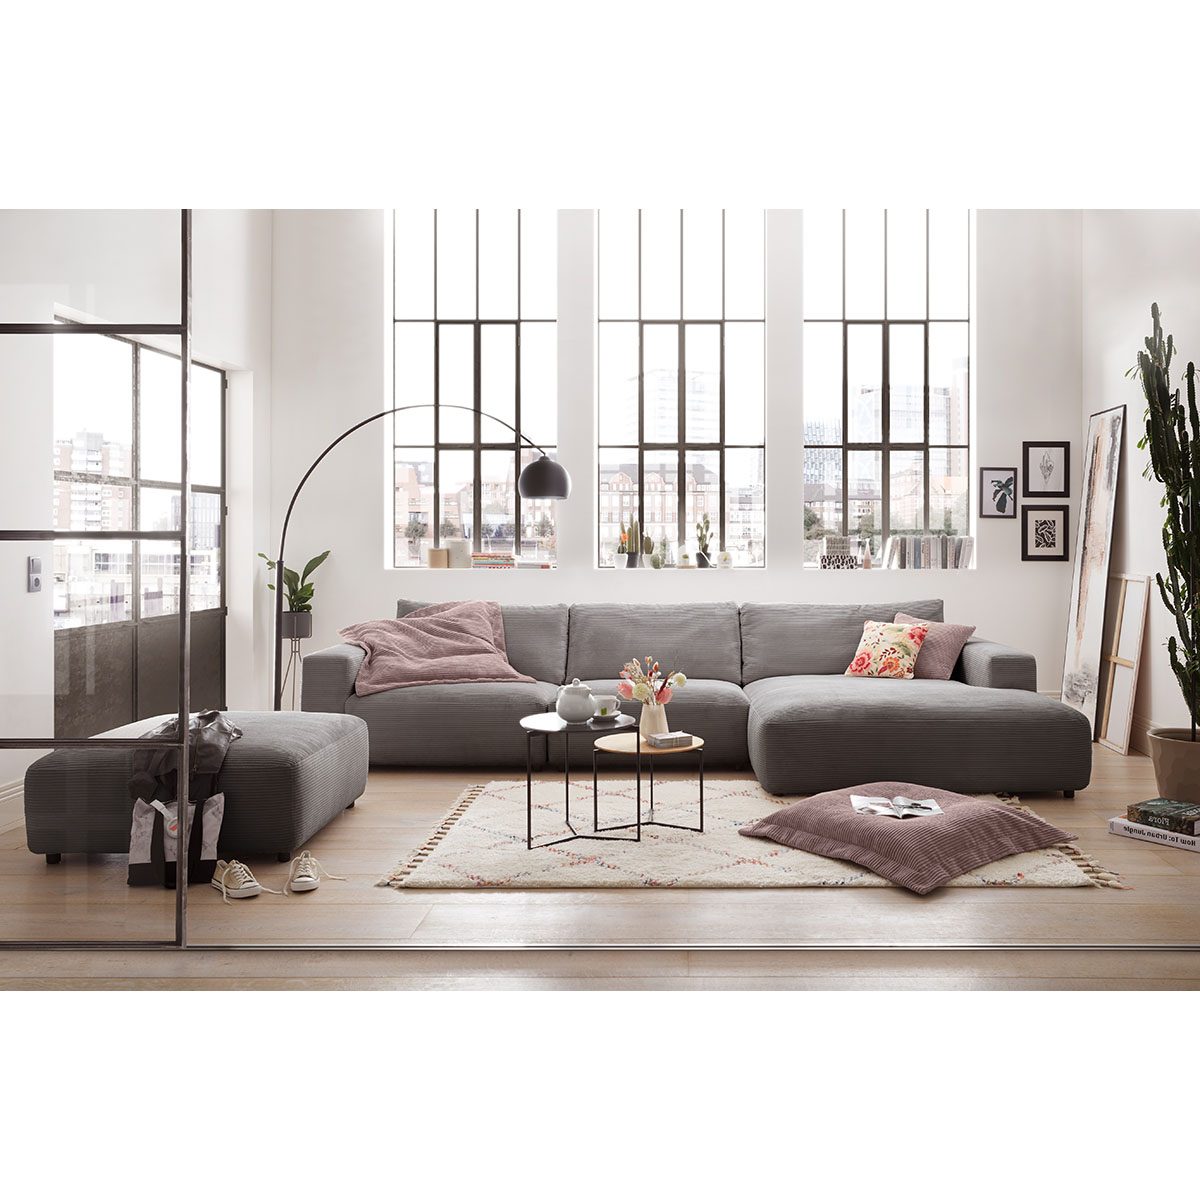 Sofa Musterring by M branded Lucia 3,5 Cord Sitzer Gallery